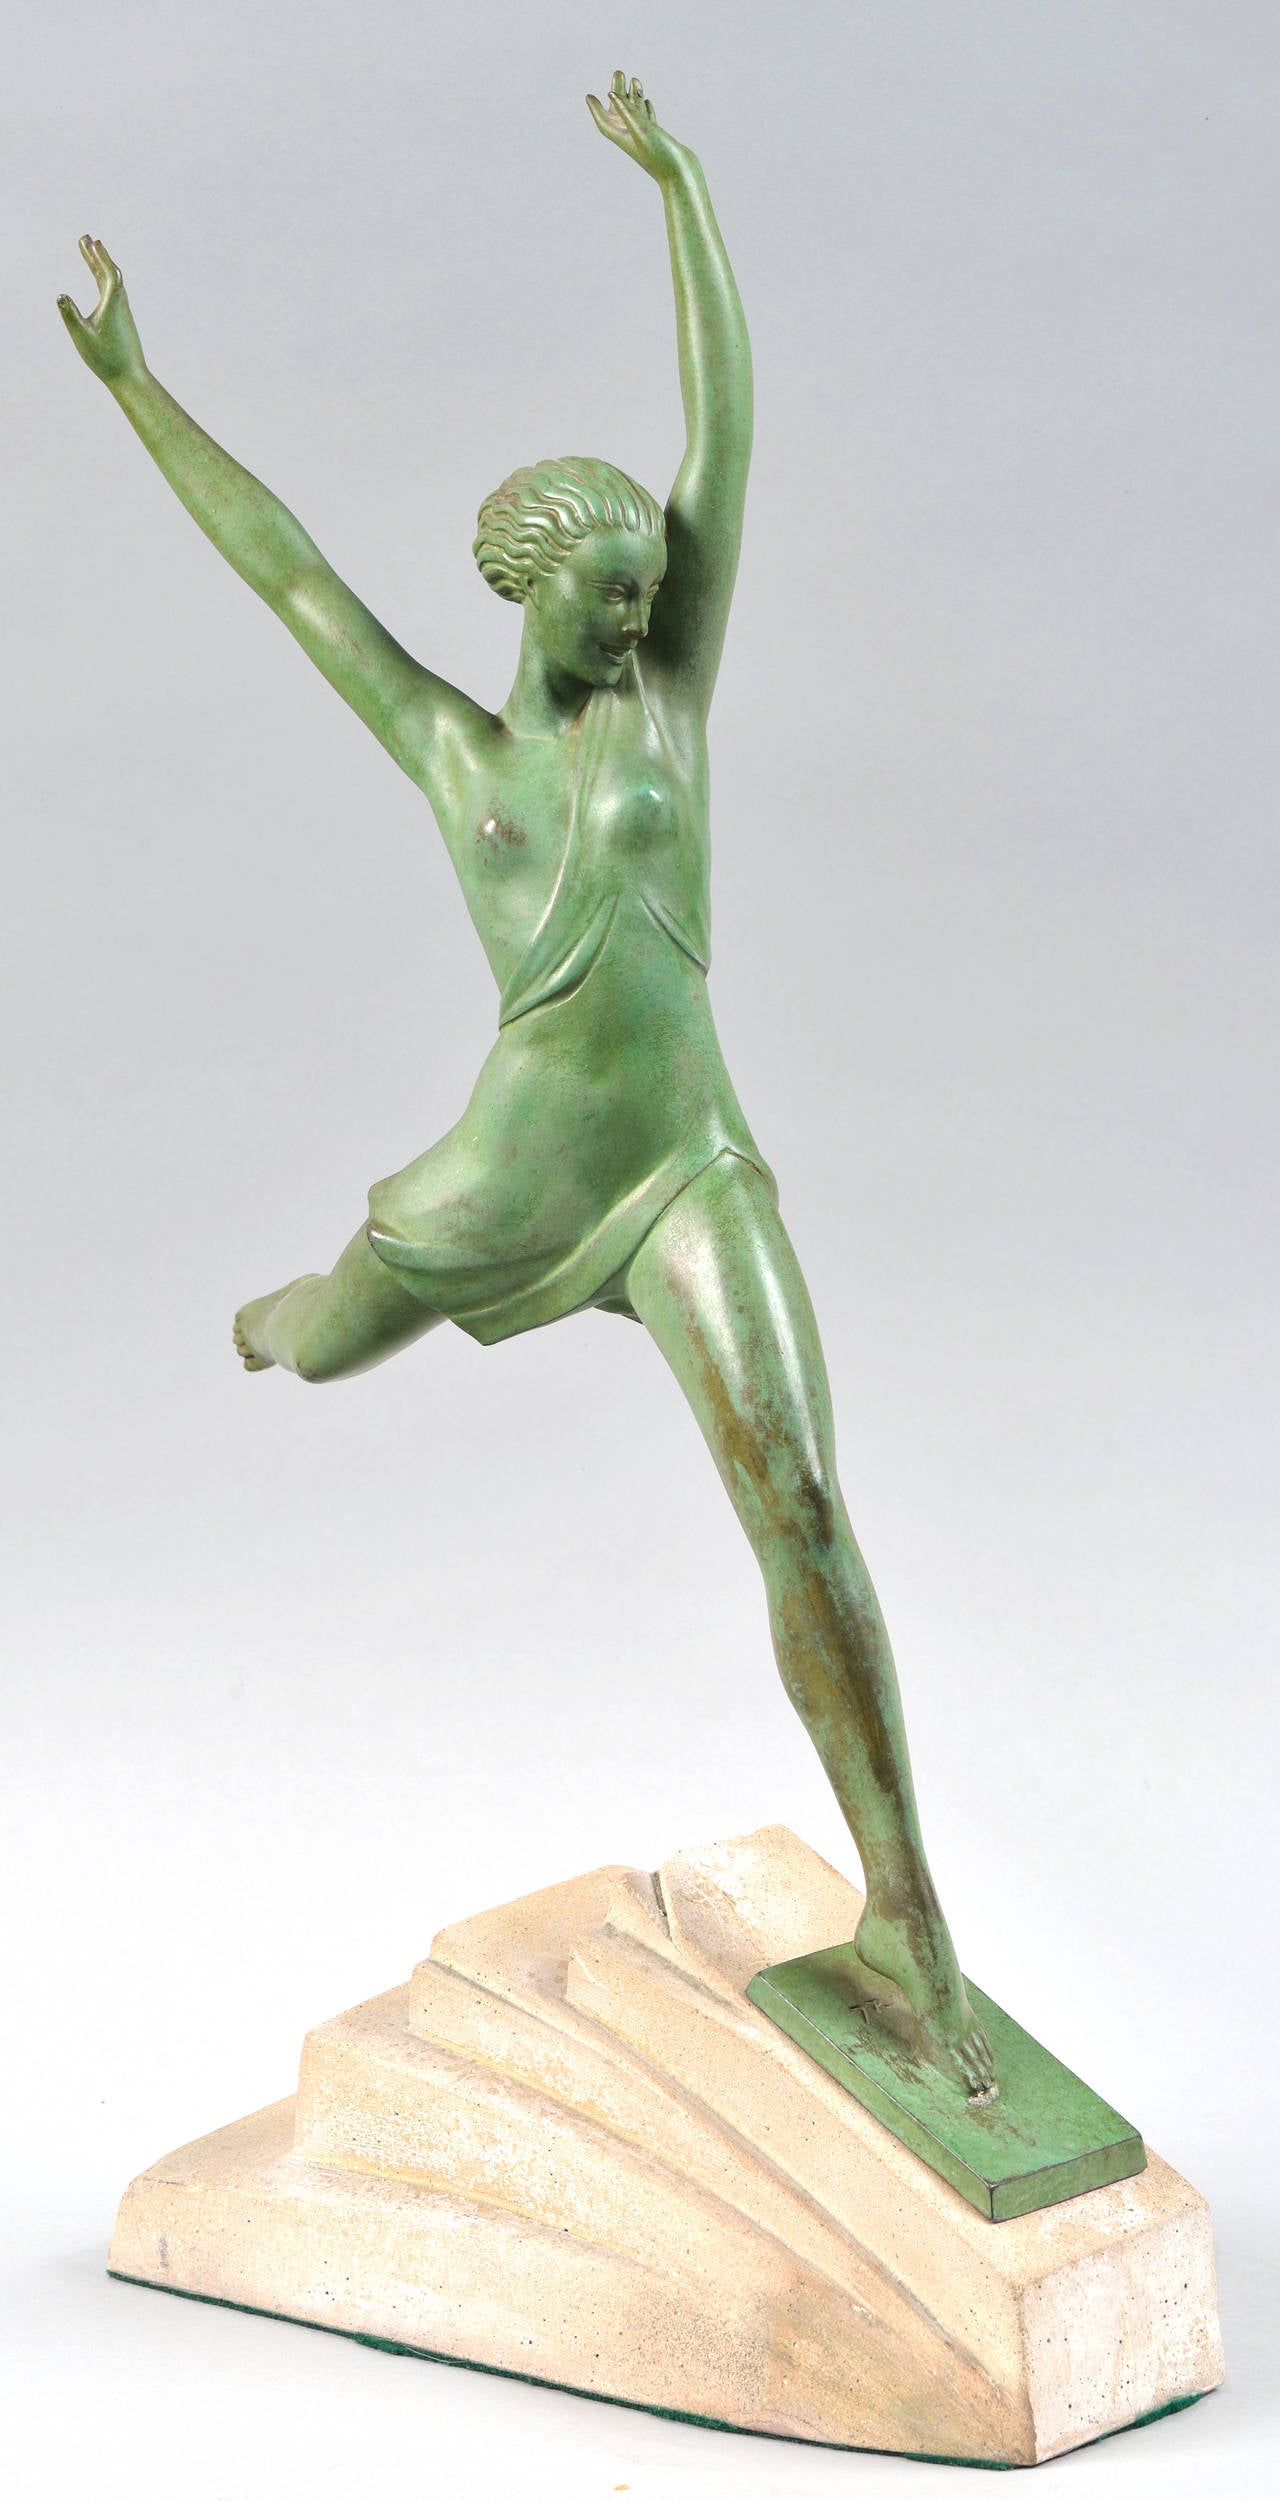 Pierre Le Faguays pseud. Fayral (French, Nantes 1892-1962).
Olympie or Atalante.
Green patinated bronze sculpture of an athlete, wearing a chiton unfastened at one shoulder in the manner of Diana the Huntress or an Amazon.
She spreading her arms